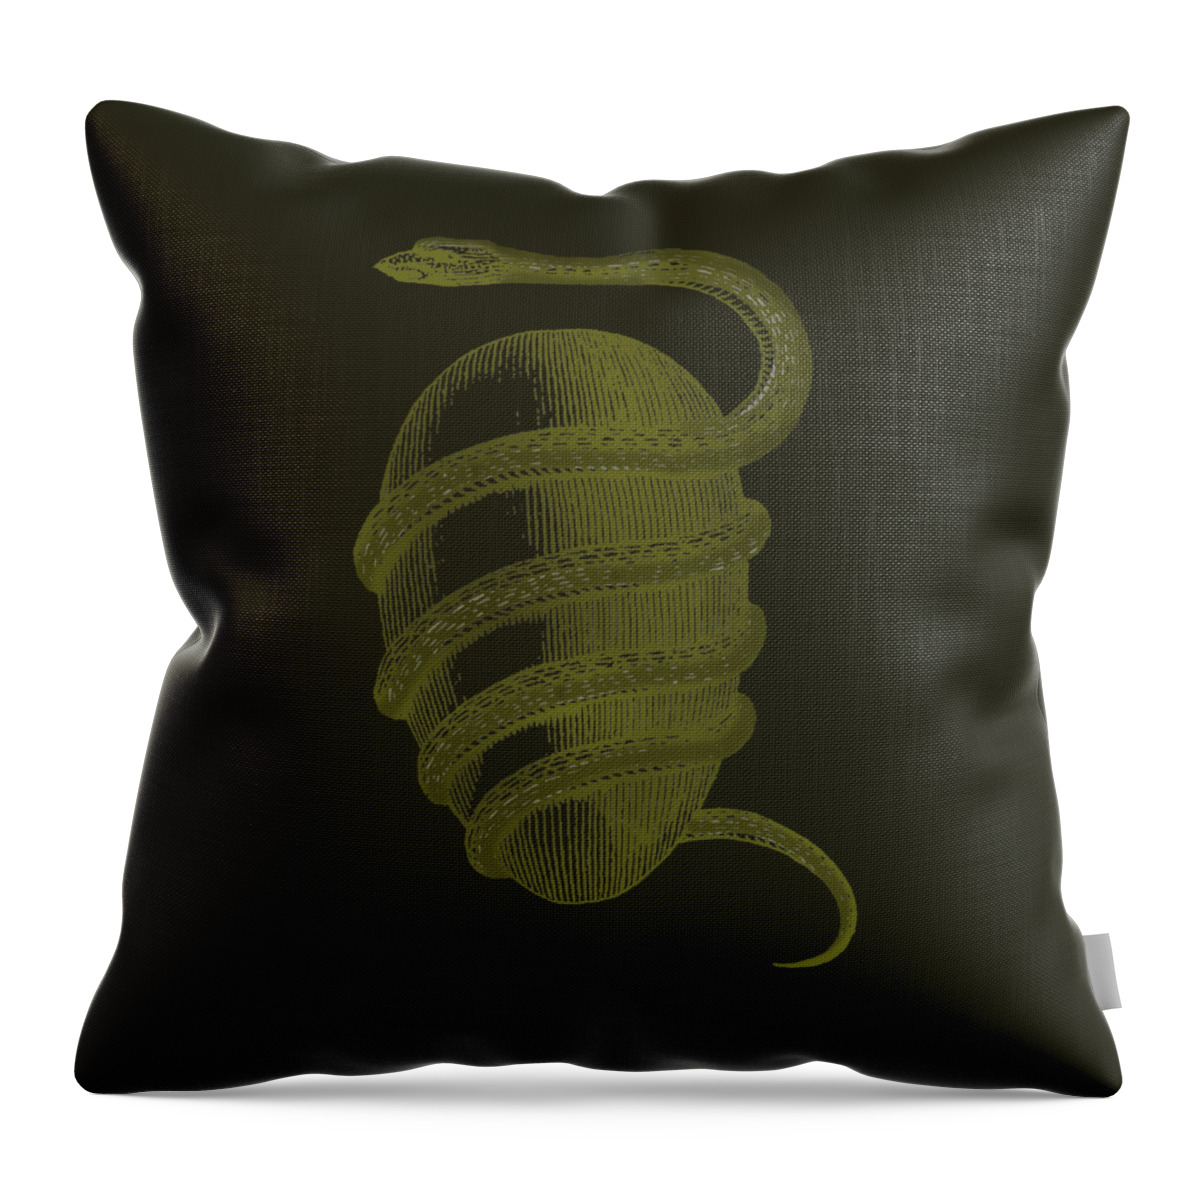 Orphic Egg Throw Pillow featuring the painting Orphic Egg 1774 by Unknown